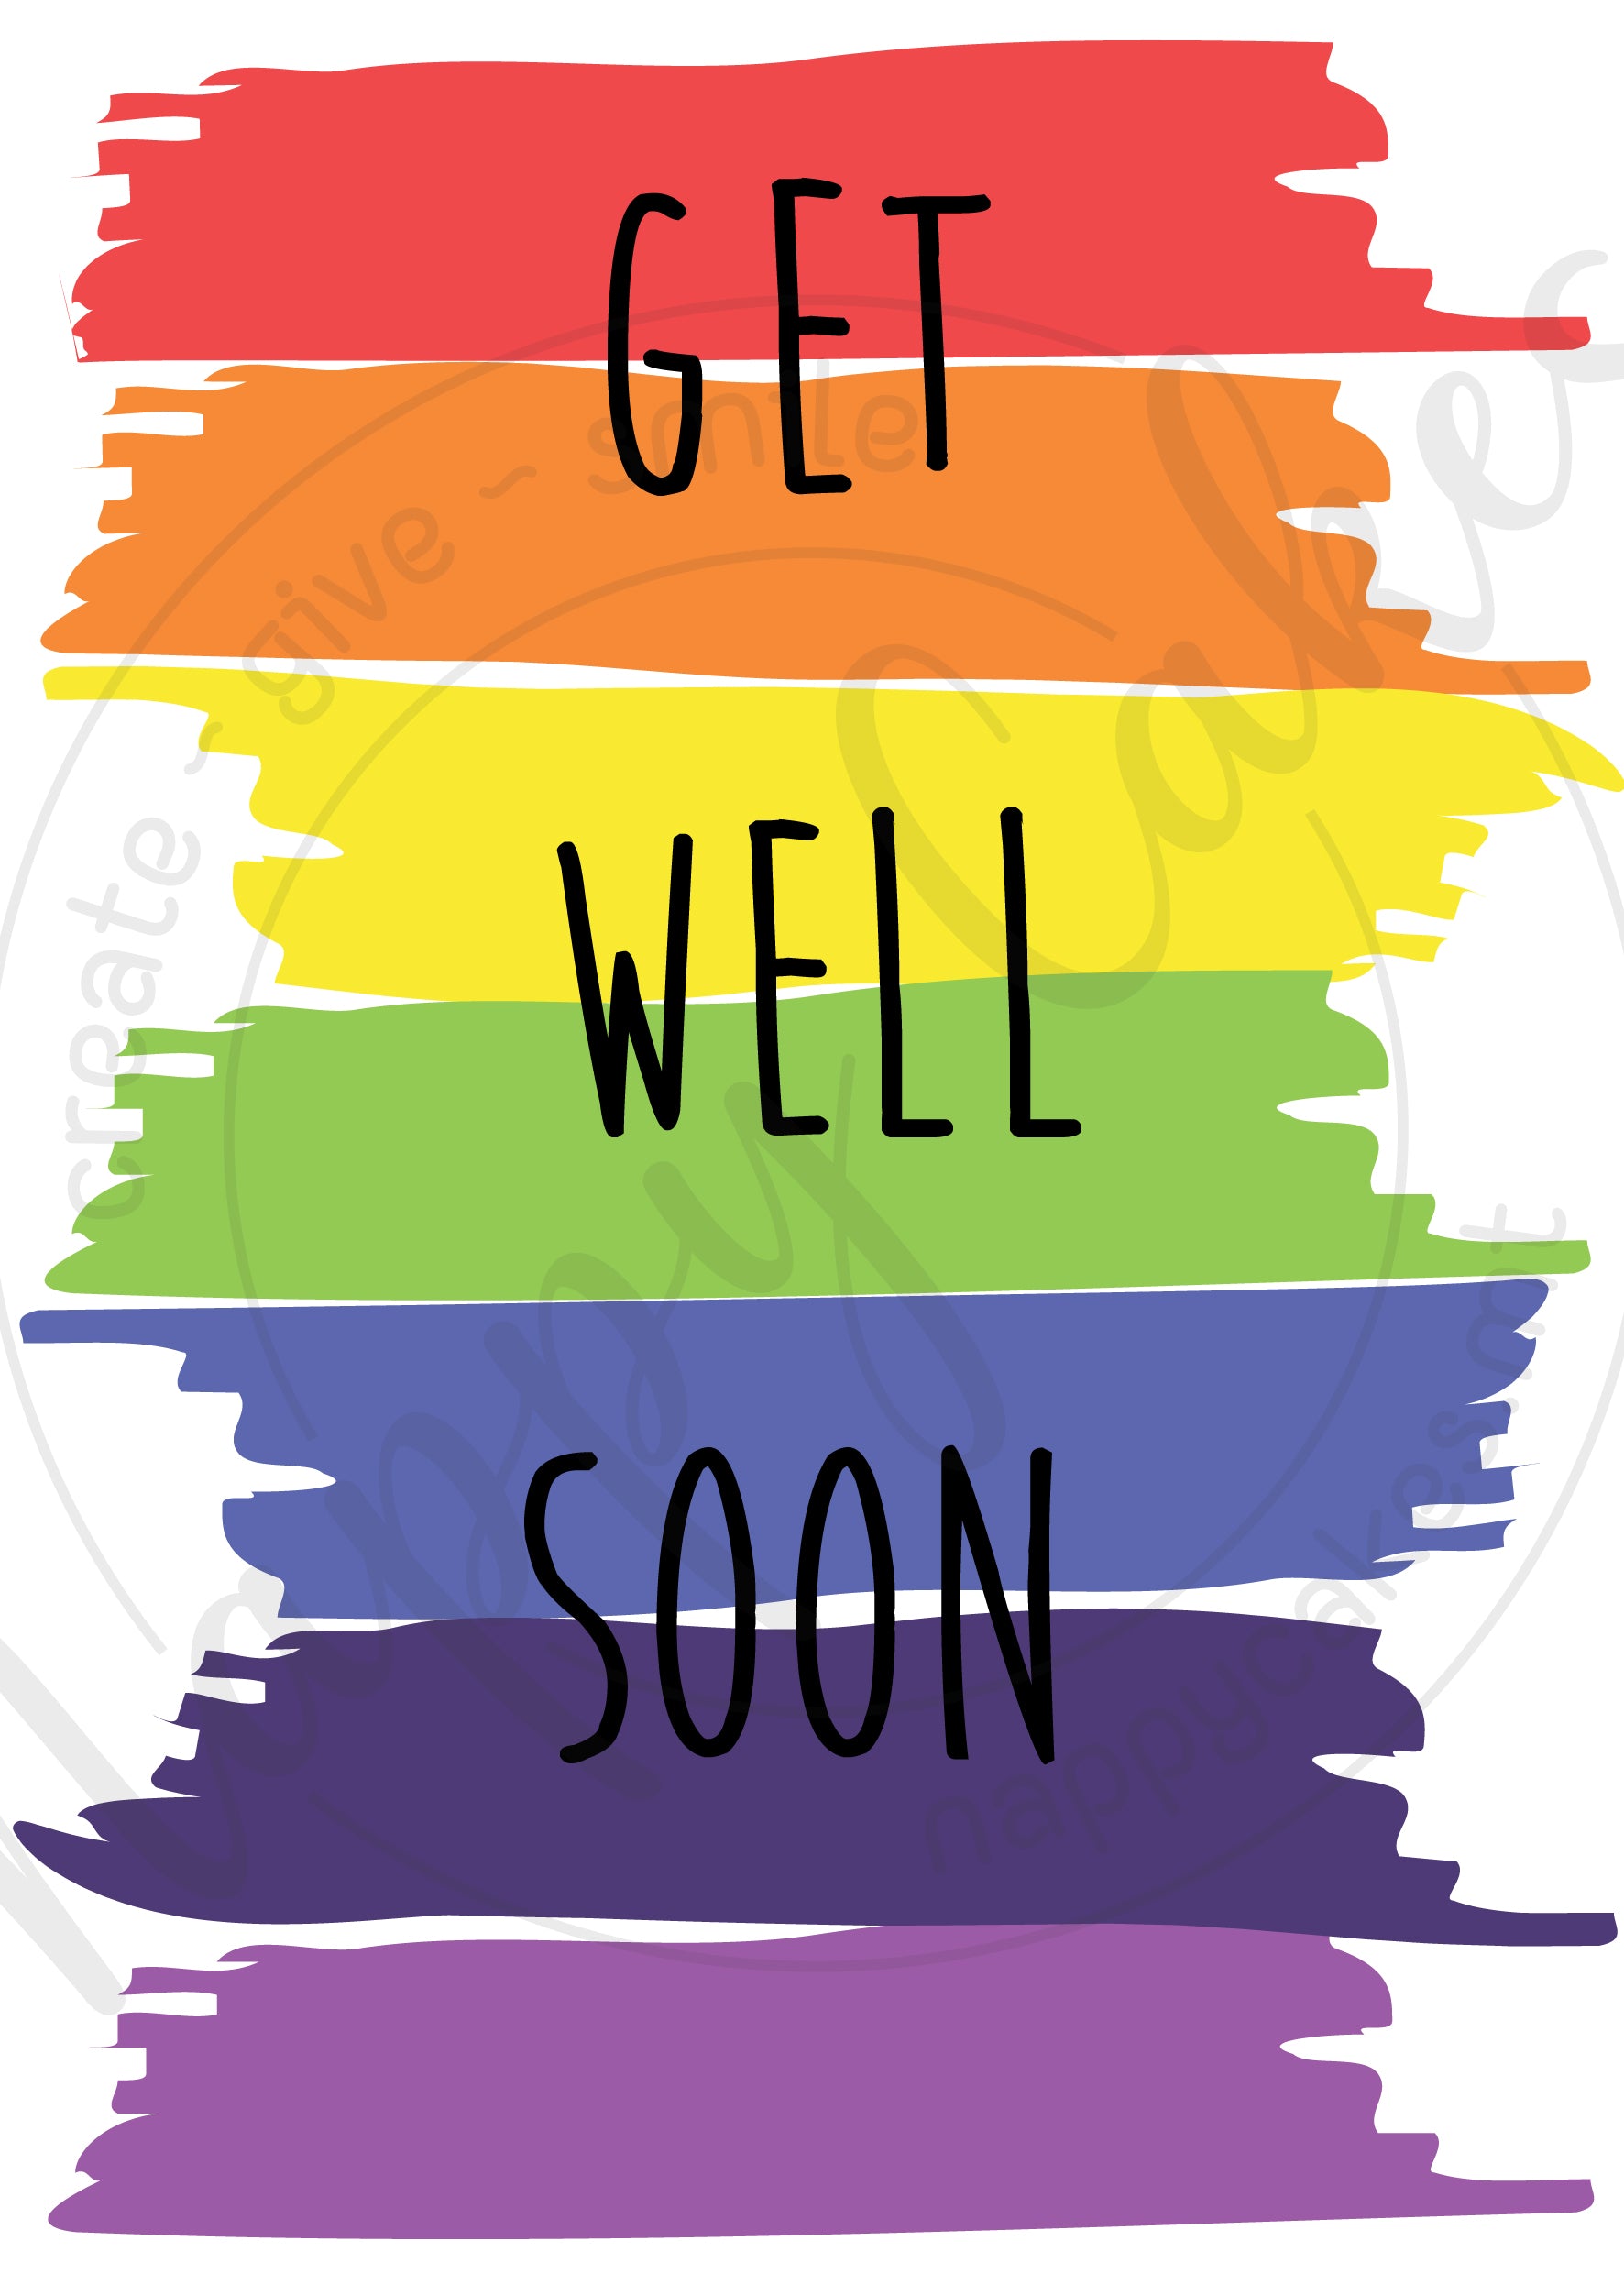 Get Well Soon Greeting Card Greeting Card